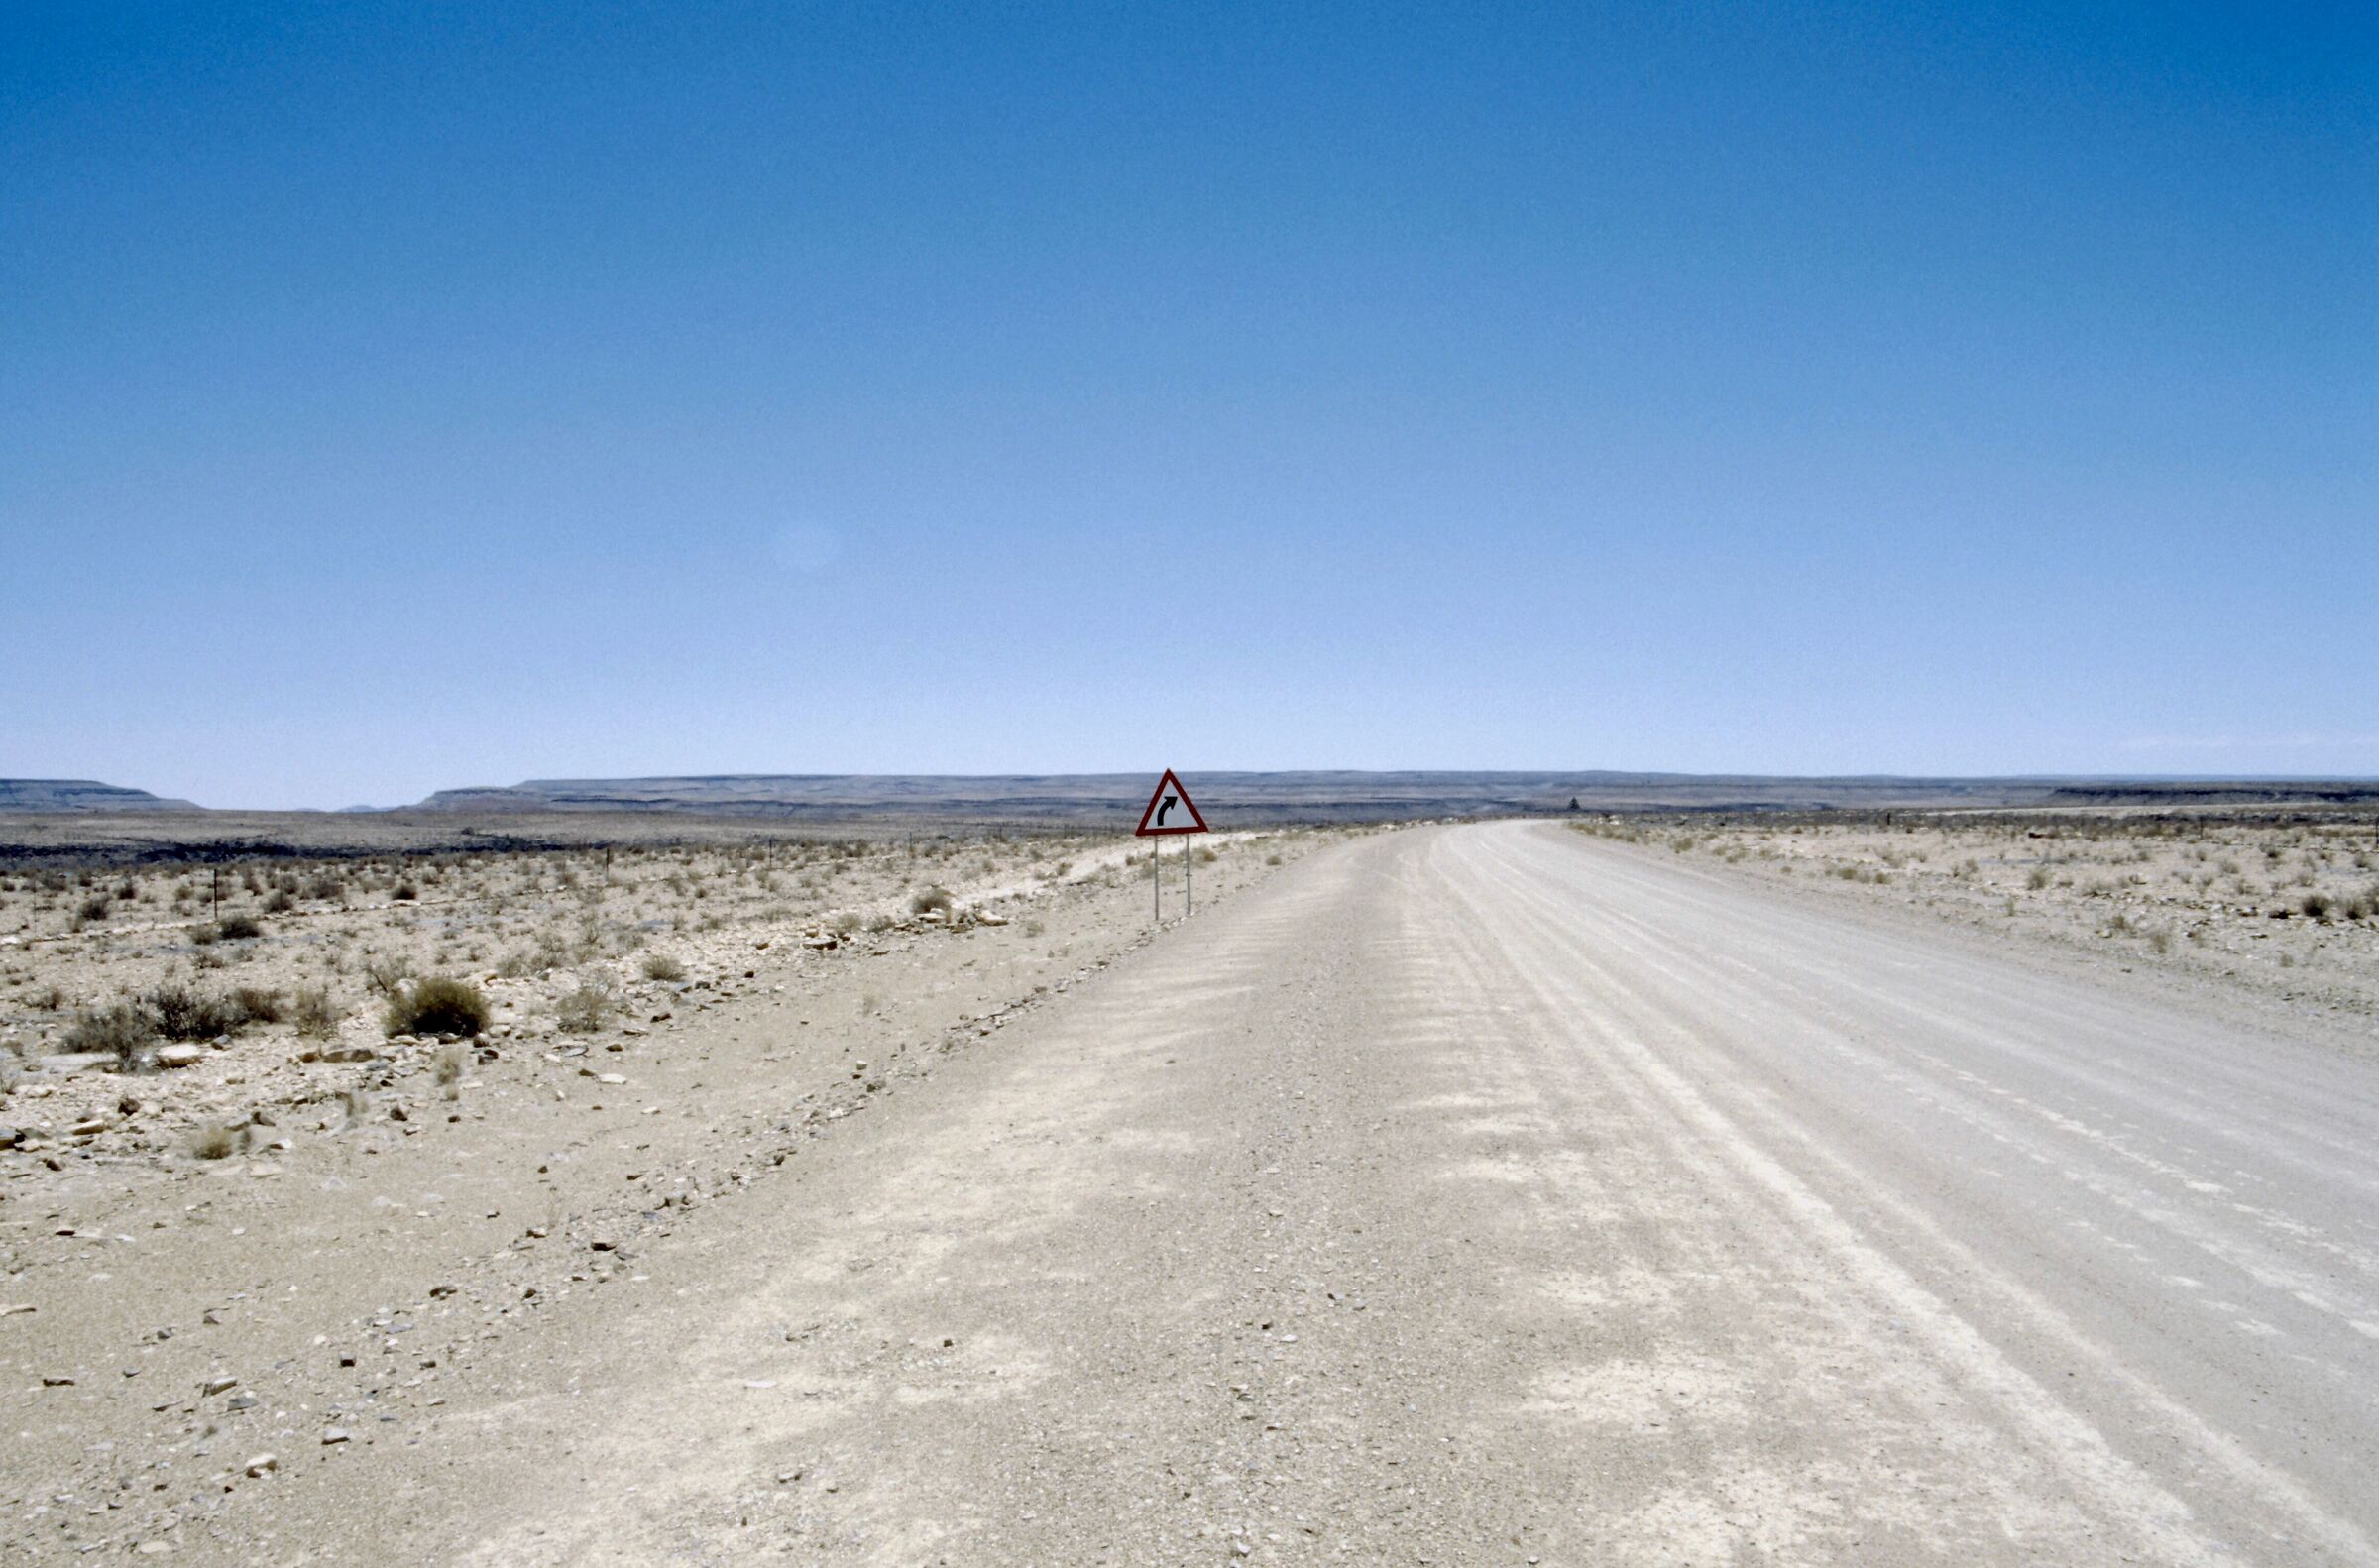 The roads of Namibia 2...